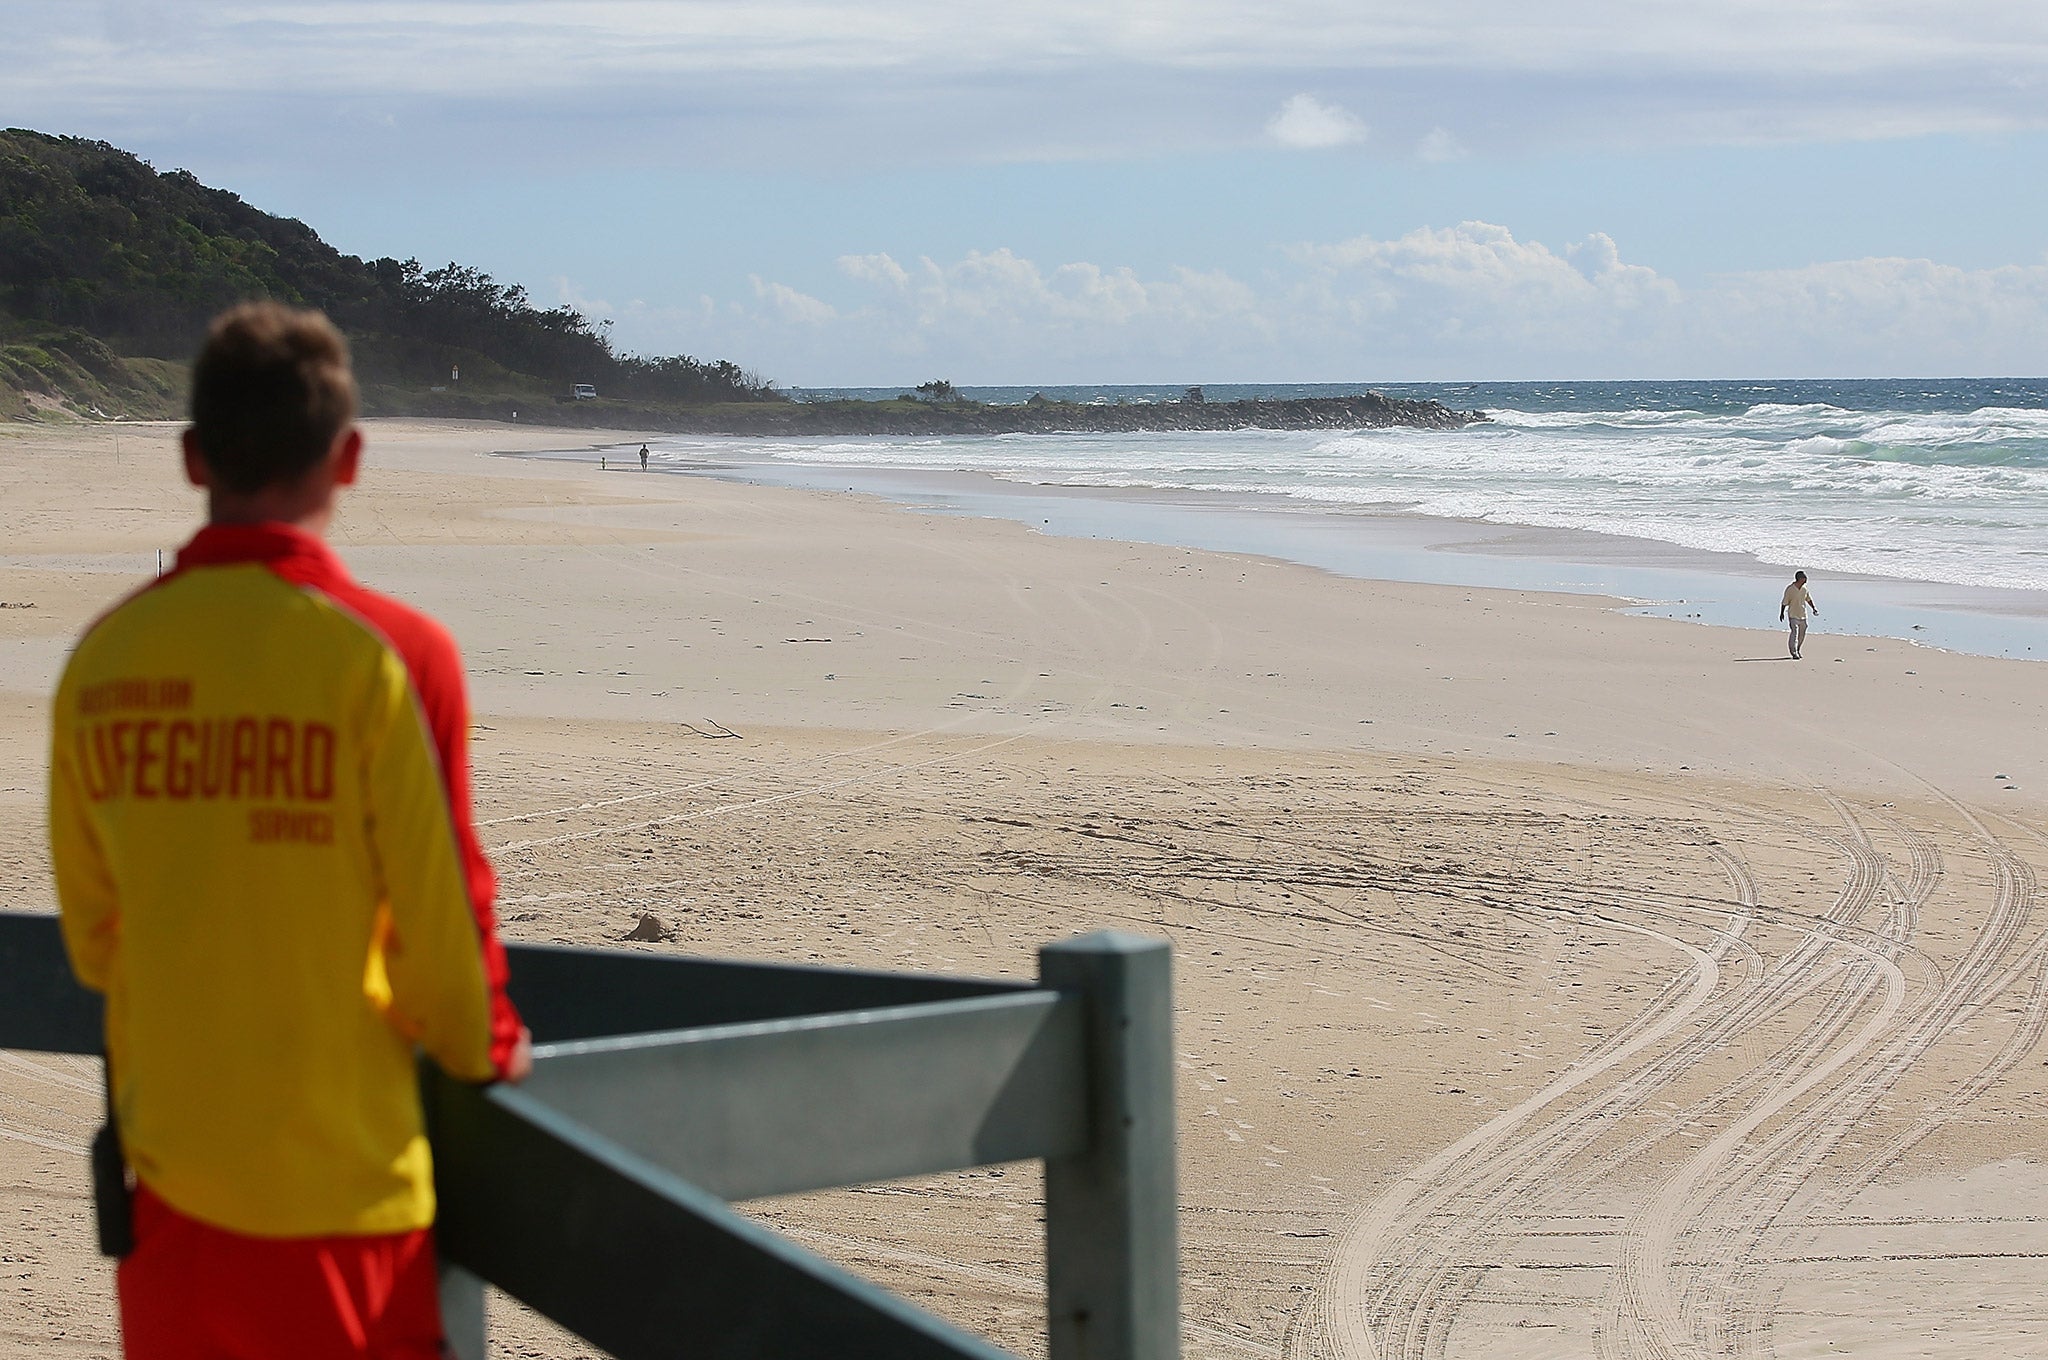 Conditions on South Curl Curl beach are making the search mission difficult